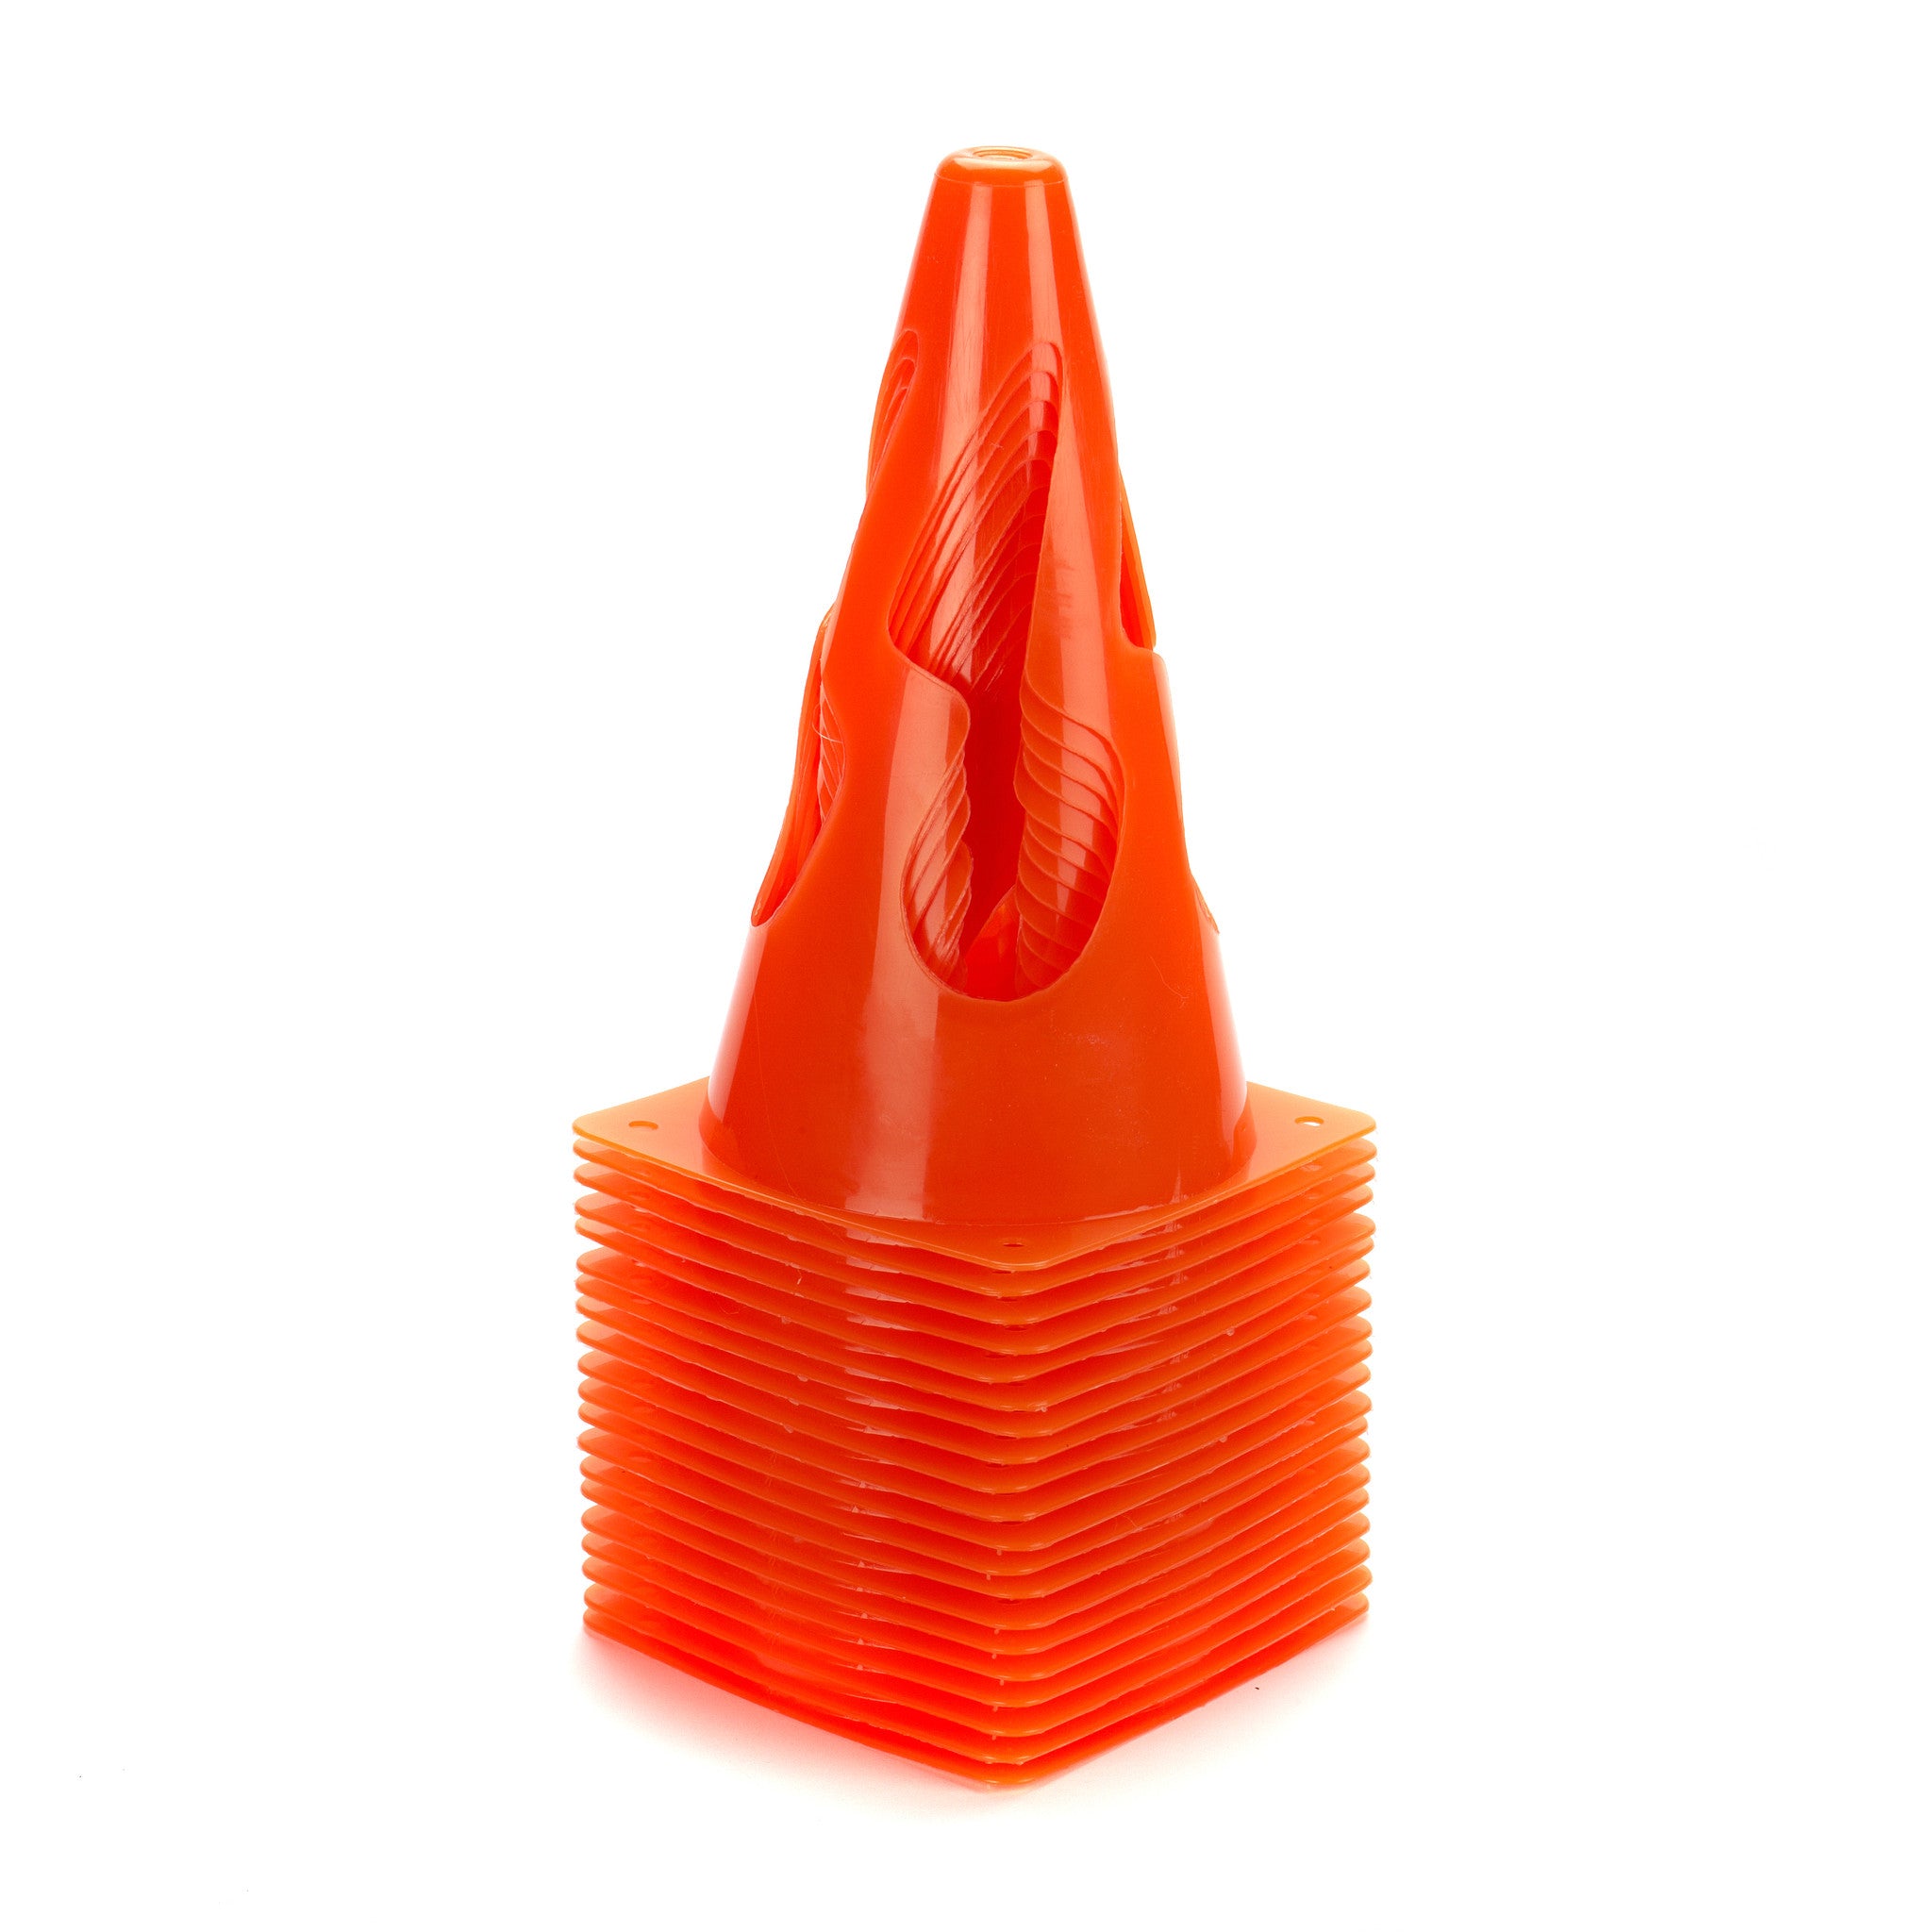 Set of 10 Pop Up Marker Cones. Bright orange collapsible safety cones for sports training.